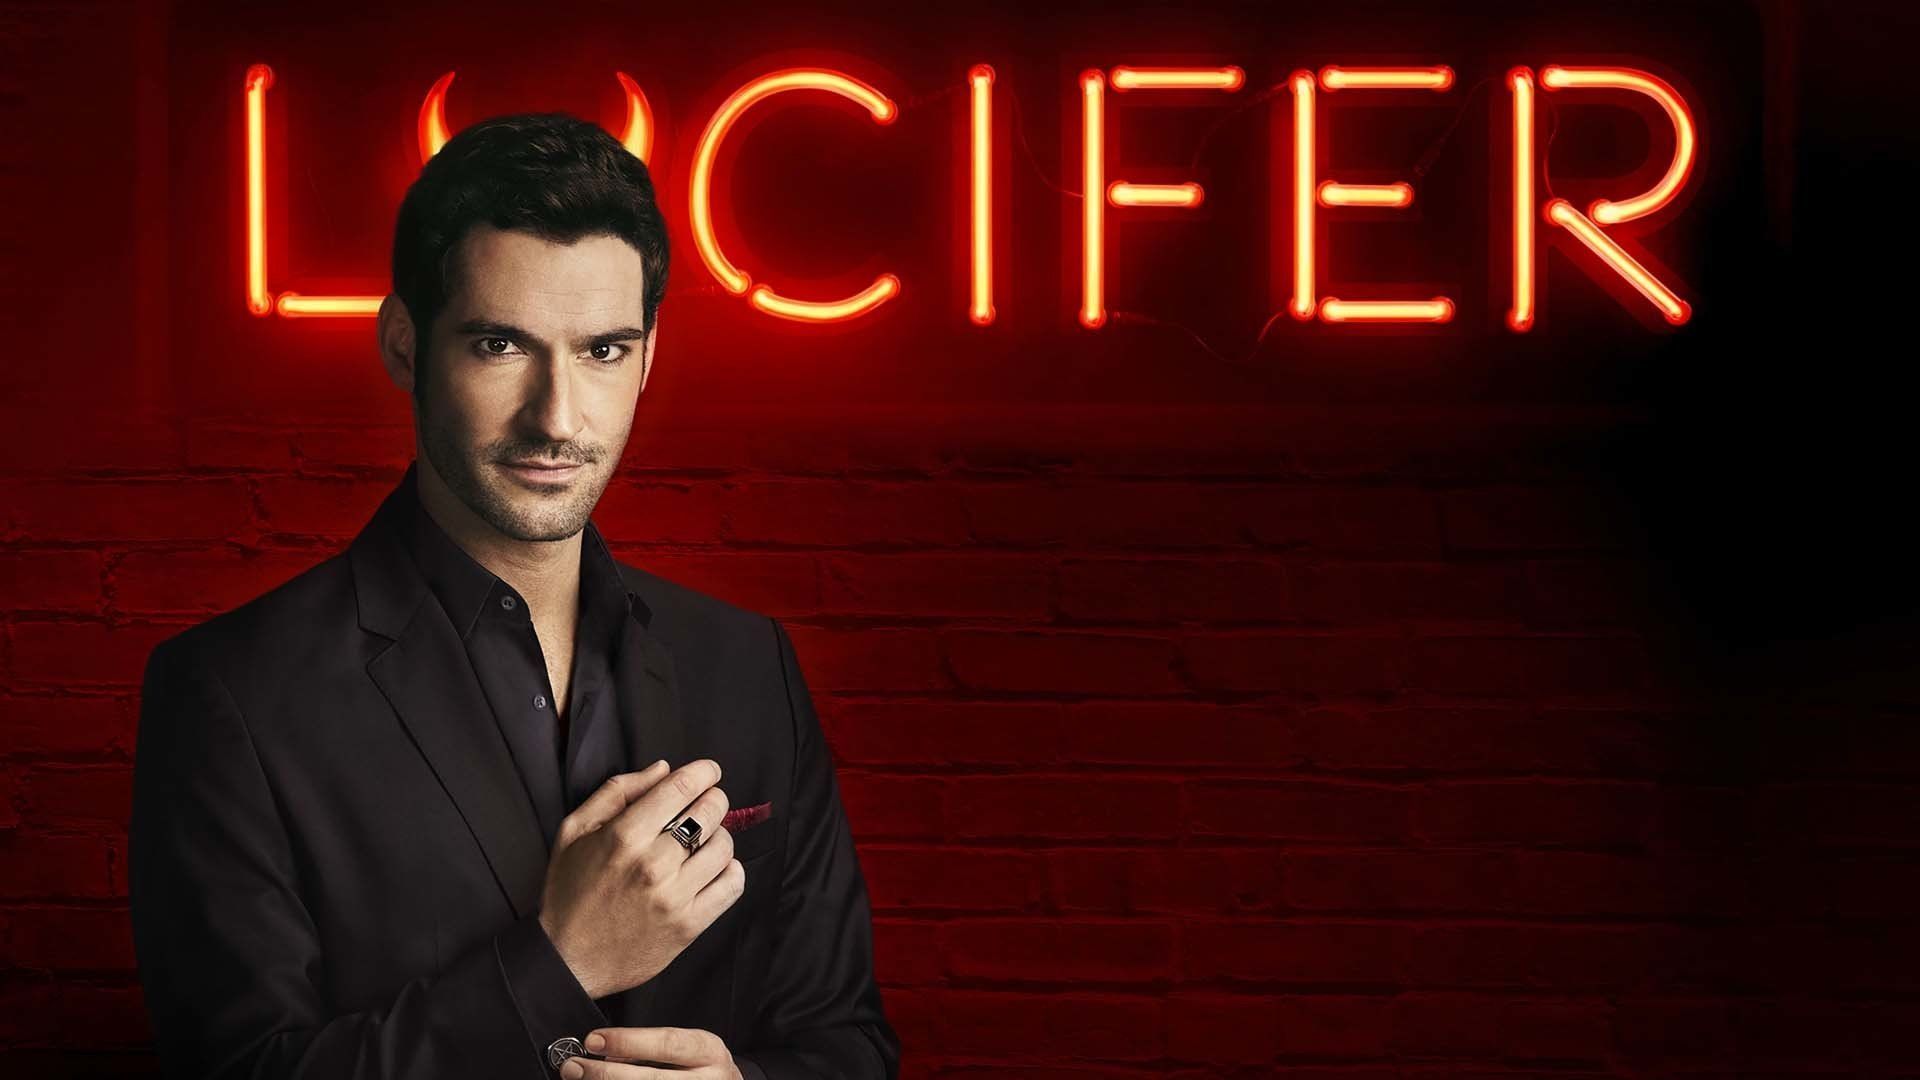 5 Netflix shows to watch after you finish Lucifer